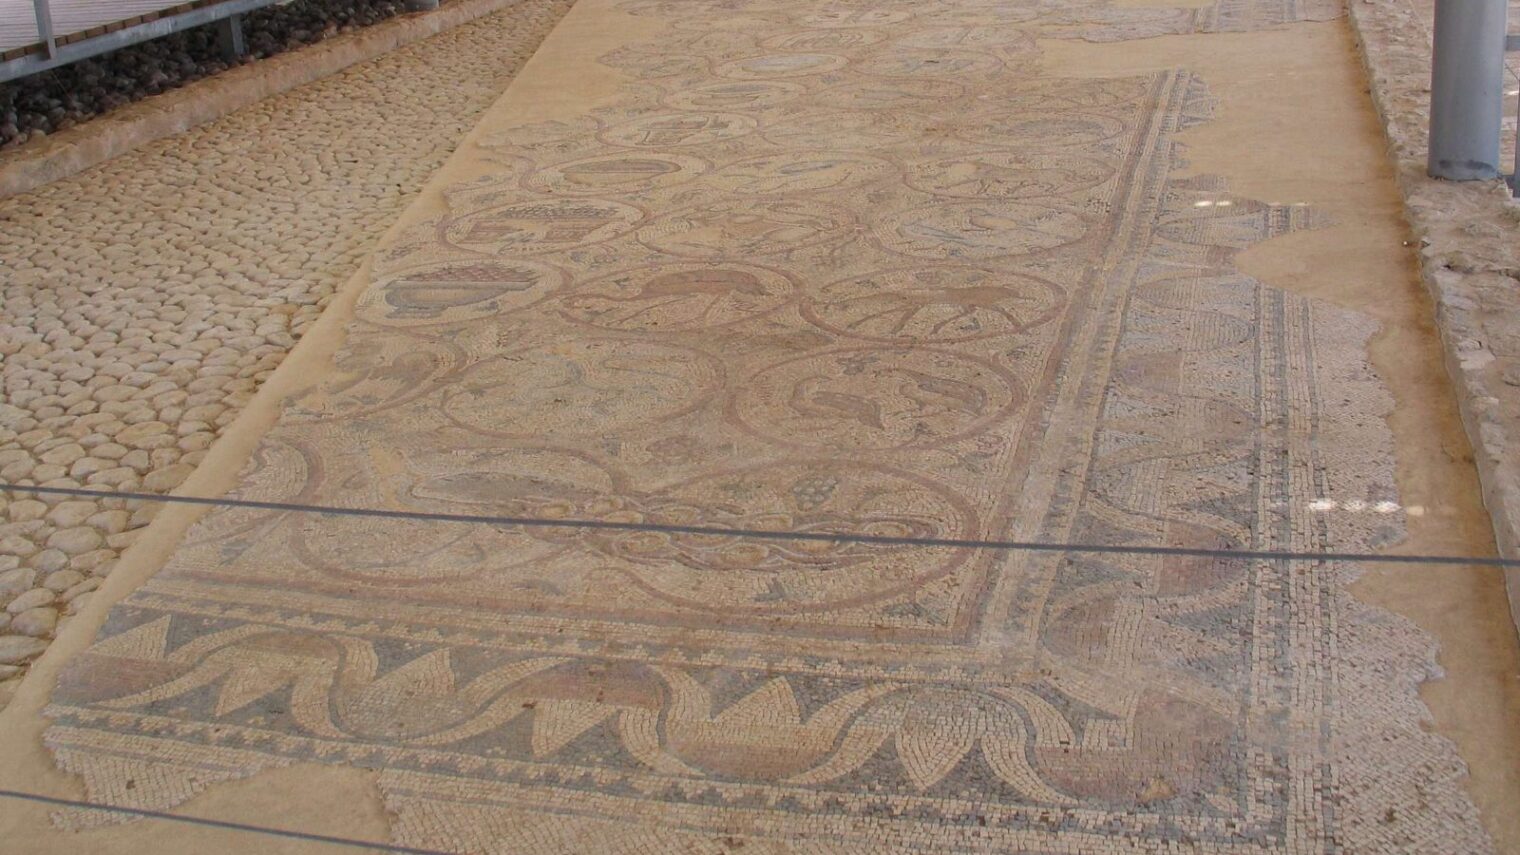 The sixth century Maon Synagogue in the Negev Desert boasted a huge mosaic of a grapevine that loops across the floor, with each loop encircling figures of animals and fruit. The mosaic also has a few Jewish images such a menorah, shofar and etrog. A copy of part of this mosaic hangs at the President’s Residence in Jerusalem. Photo by Bukvoed/Wikimedia Commons